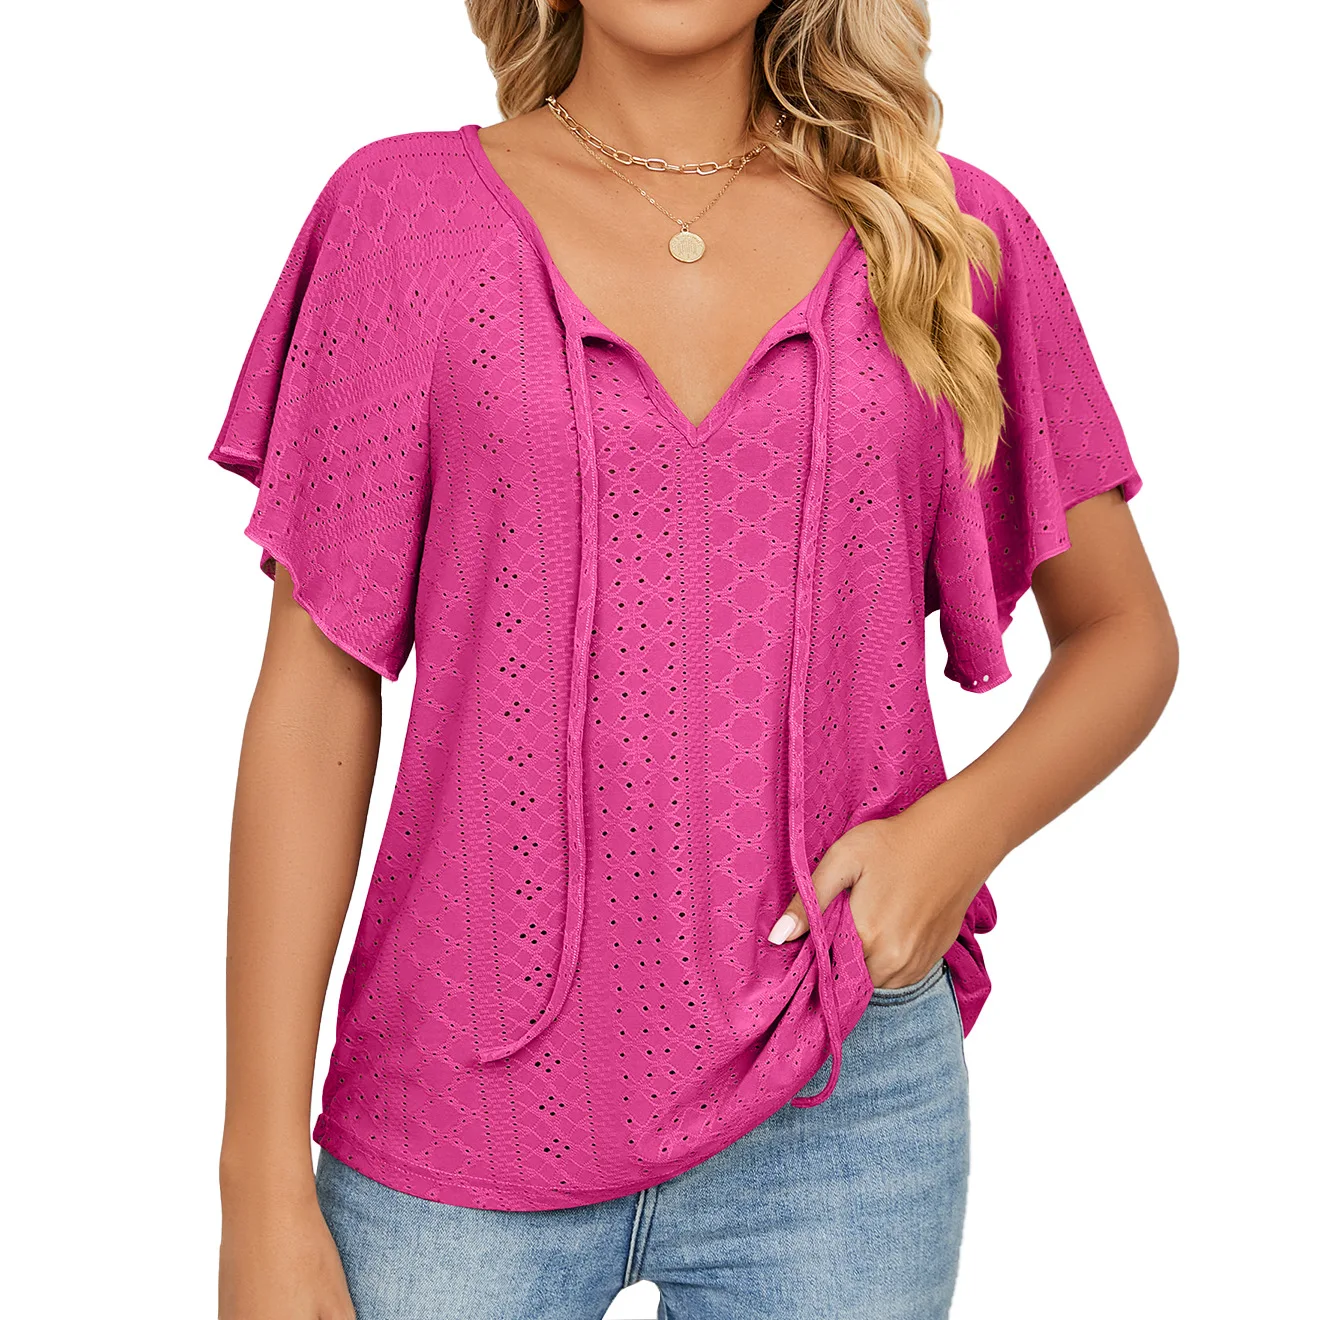 Wholesale V Neck Lace Up Ruffle Loose Top Tops For Women Women's T Shirt